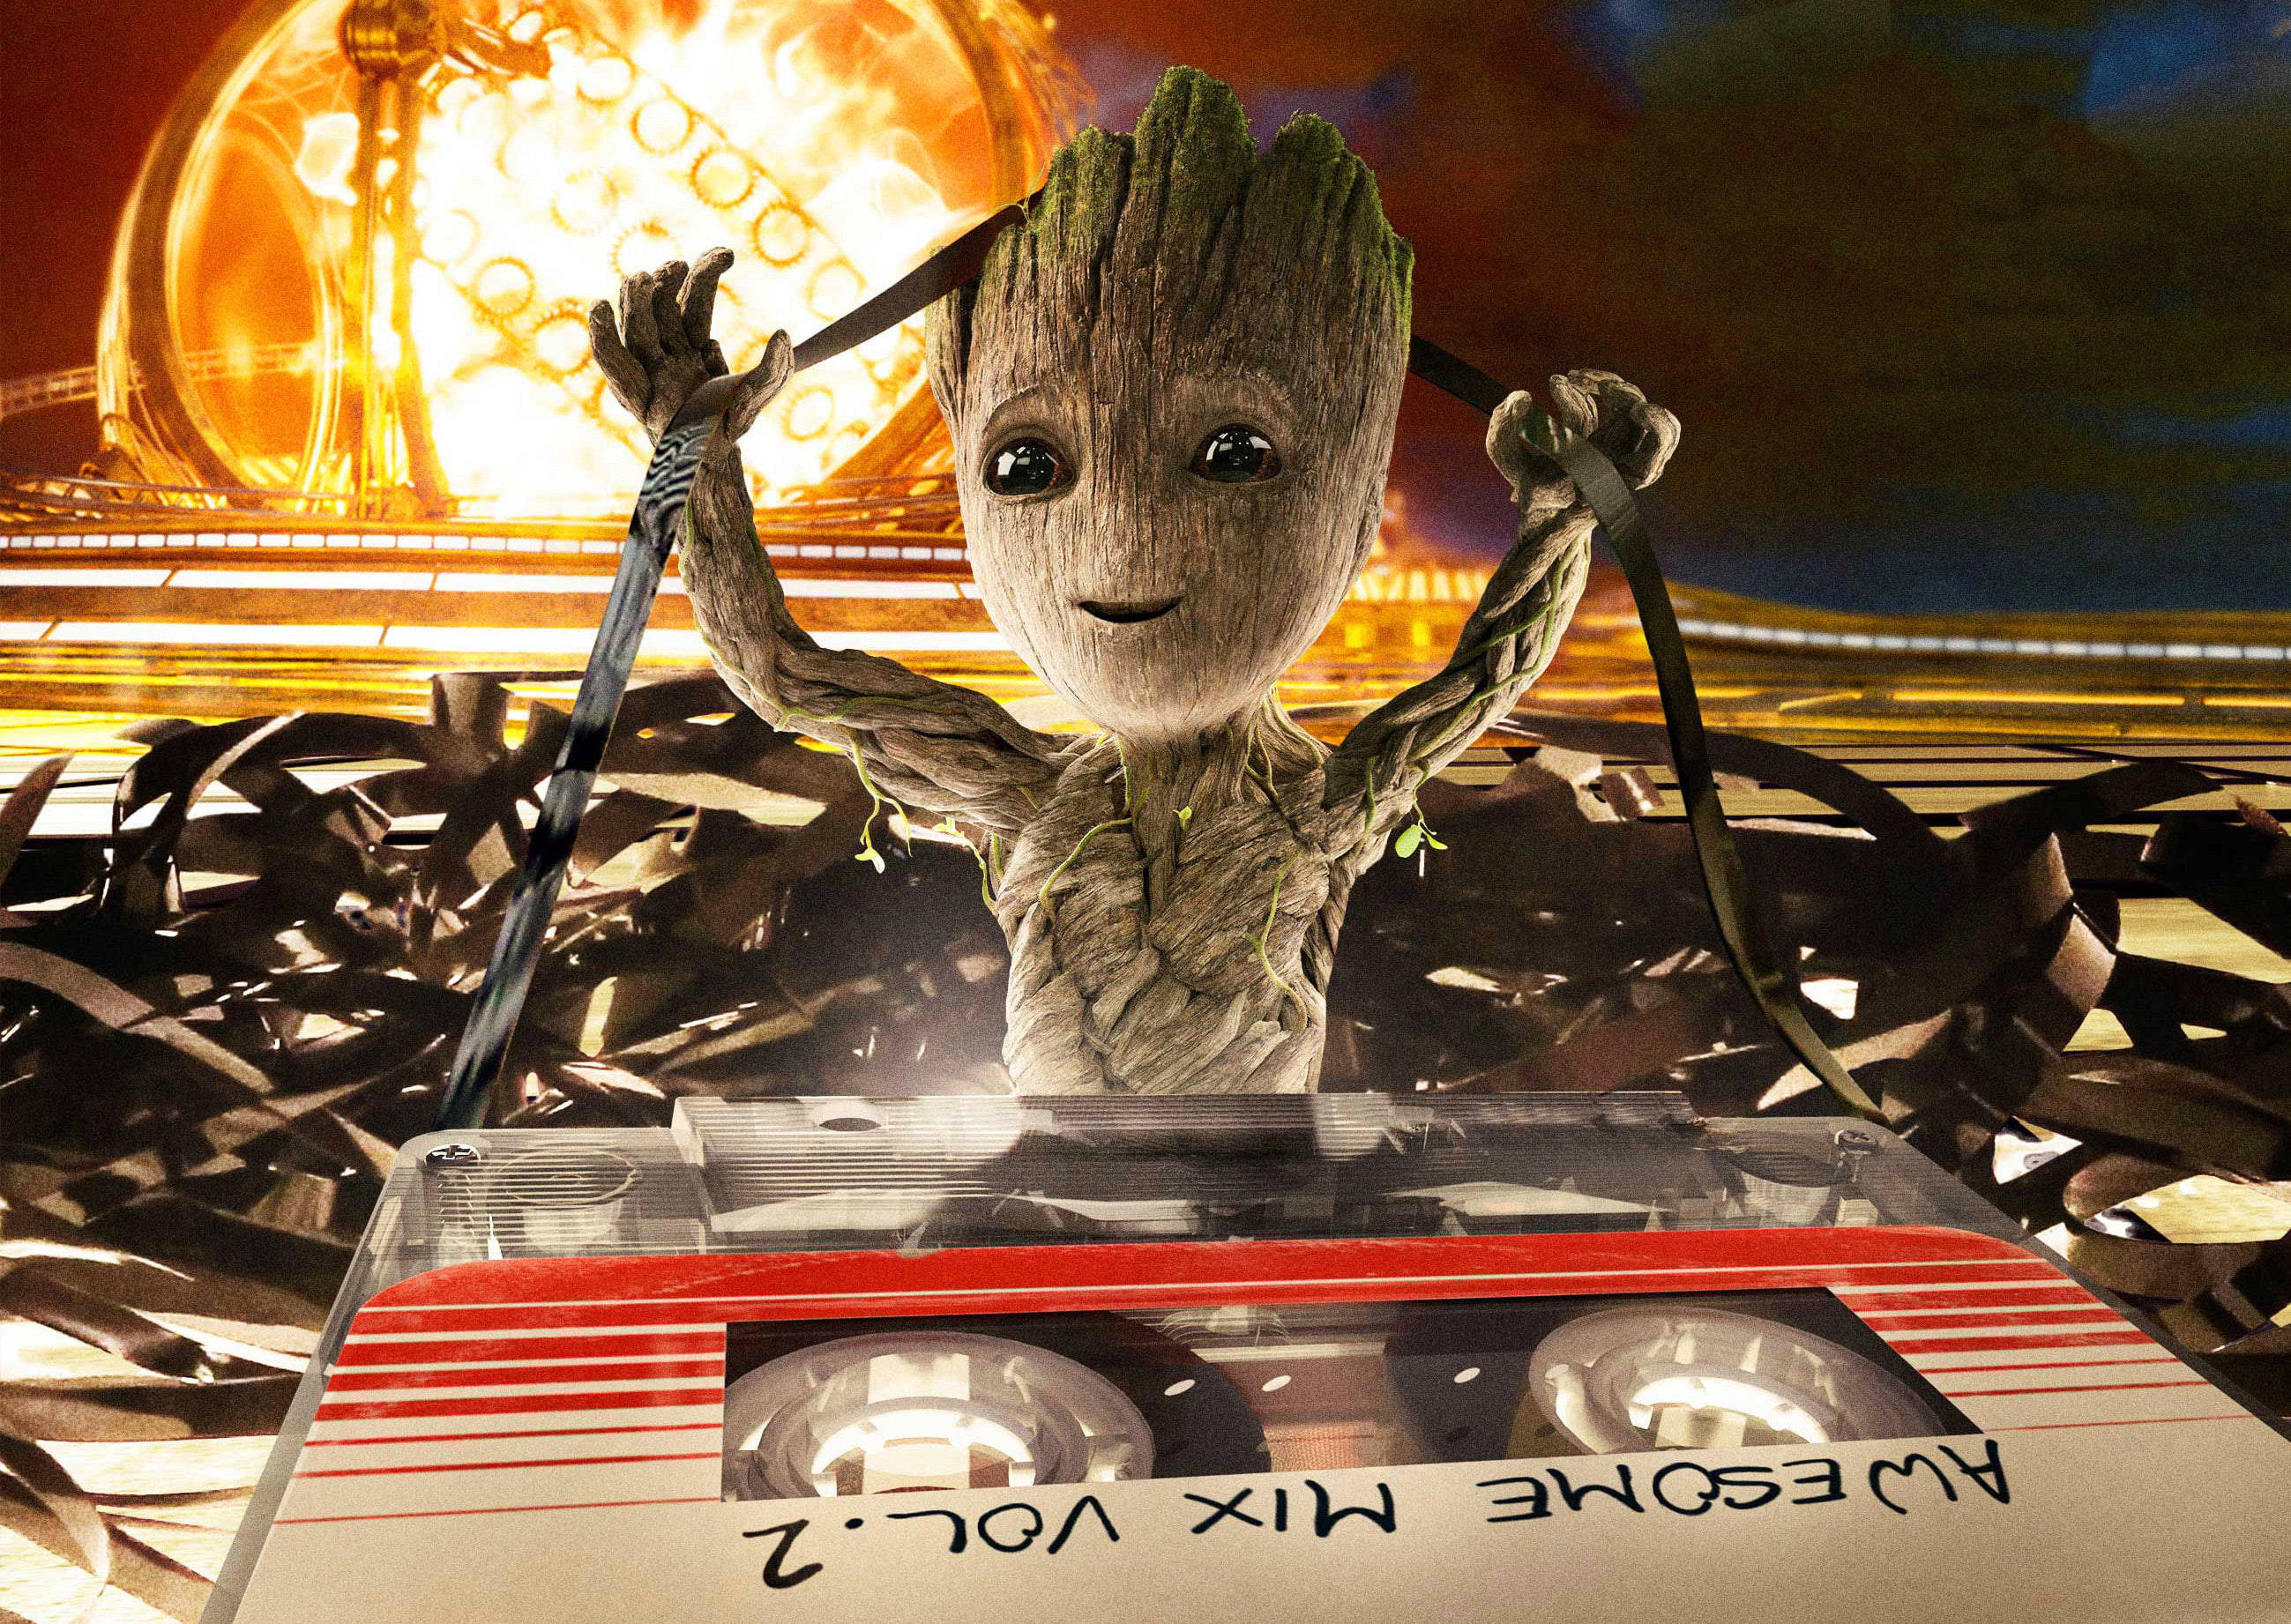 Download Groot Awesome Mix Vol. 2 Wallpaper 